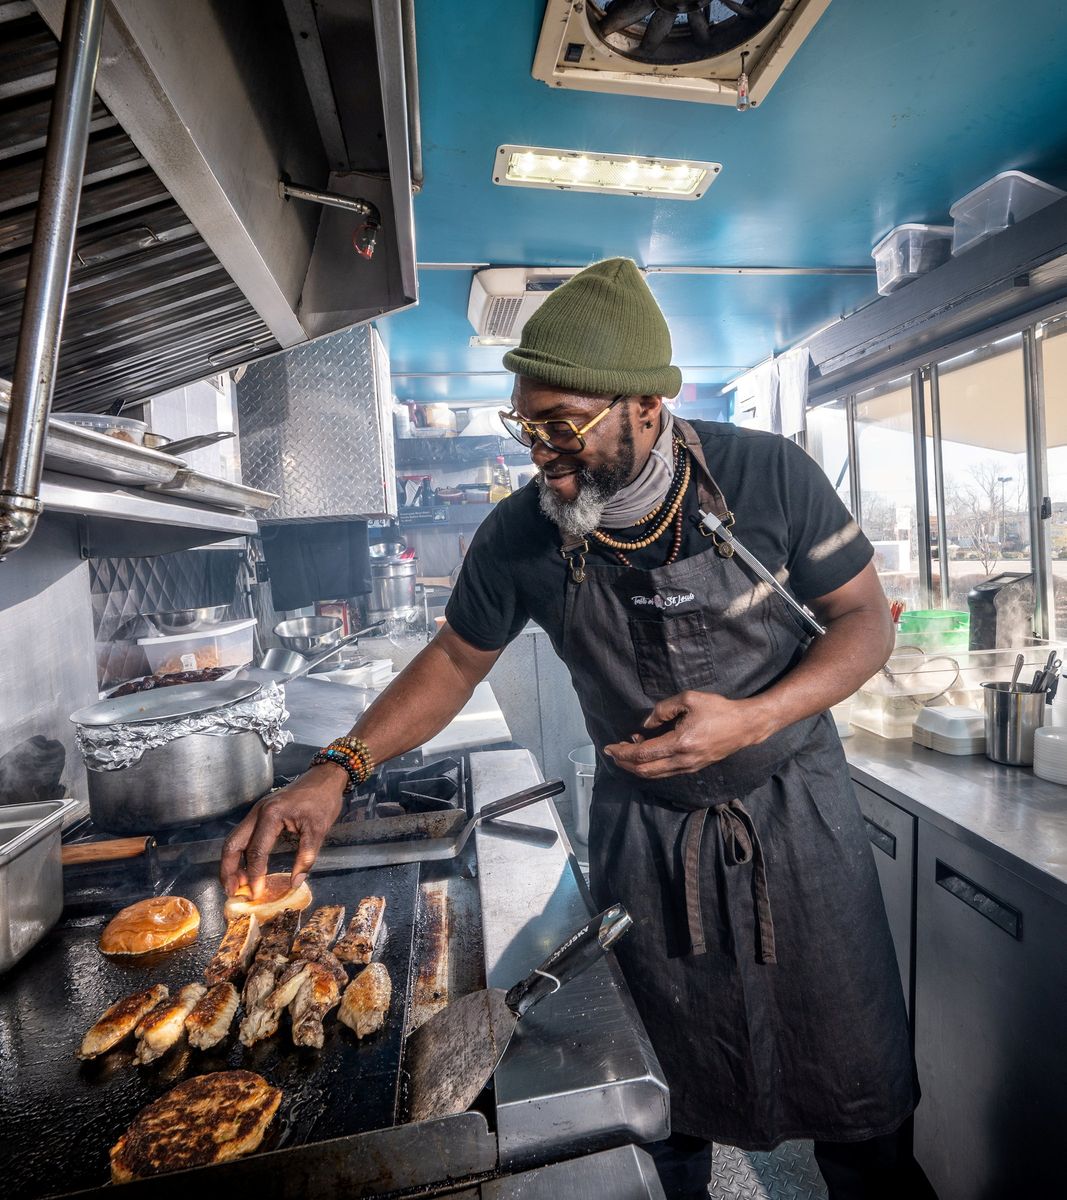 <p>If you want fresh burgers, sandwiches, ribs, and even ramen in the Long Island area, <em>Chopped</em> champion Marc Bynum's <a href="https://www.instagram.com/thehushtruck/?hl=en">Hush Truck</a> is all over New York and available for catering as well. There's a great variety to the menu and it's all made with care and attention.</p>